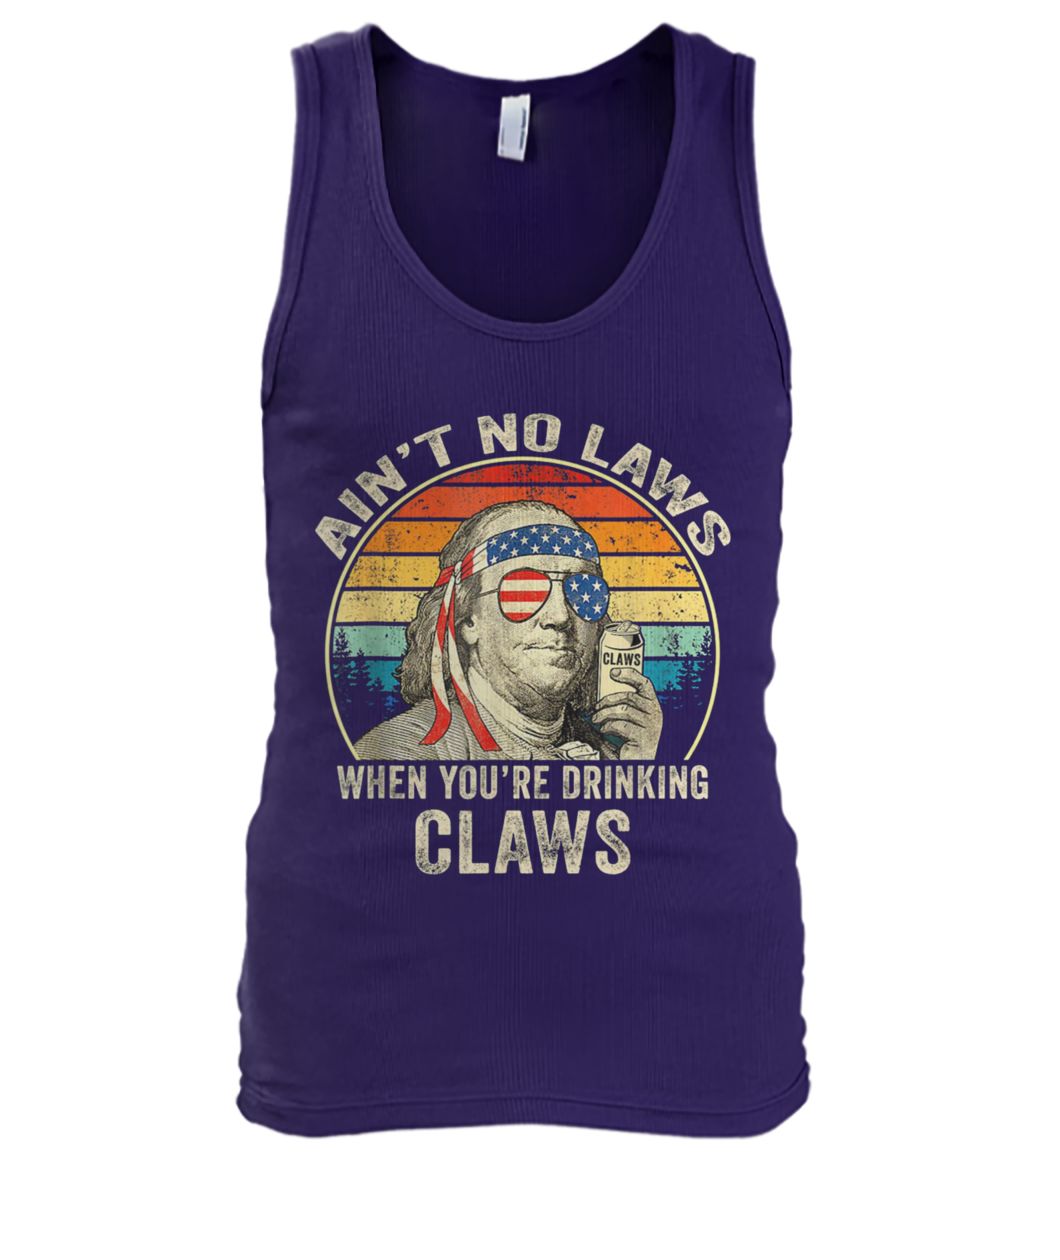 Vintage george washington ain't no laws when you're drinking claws men's tank top